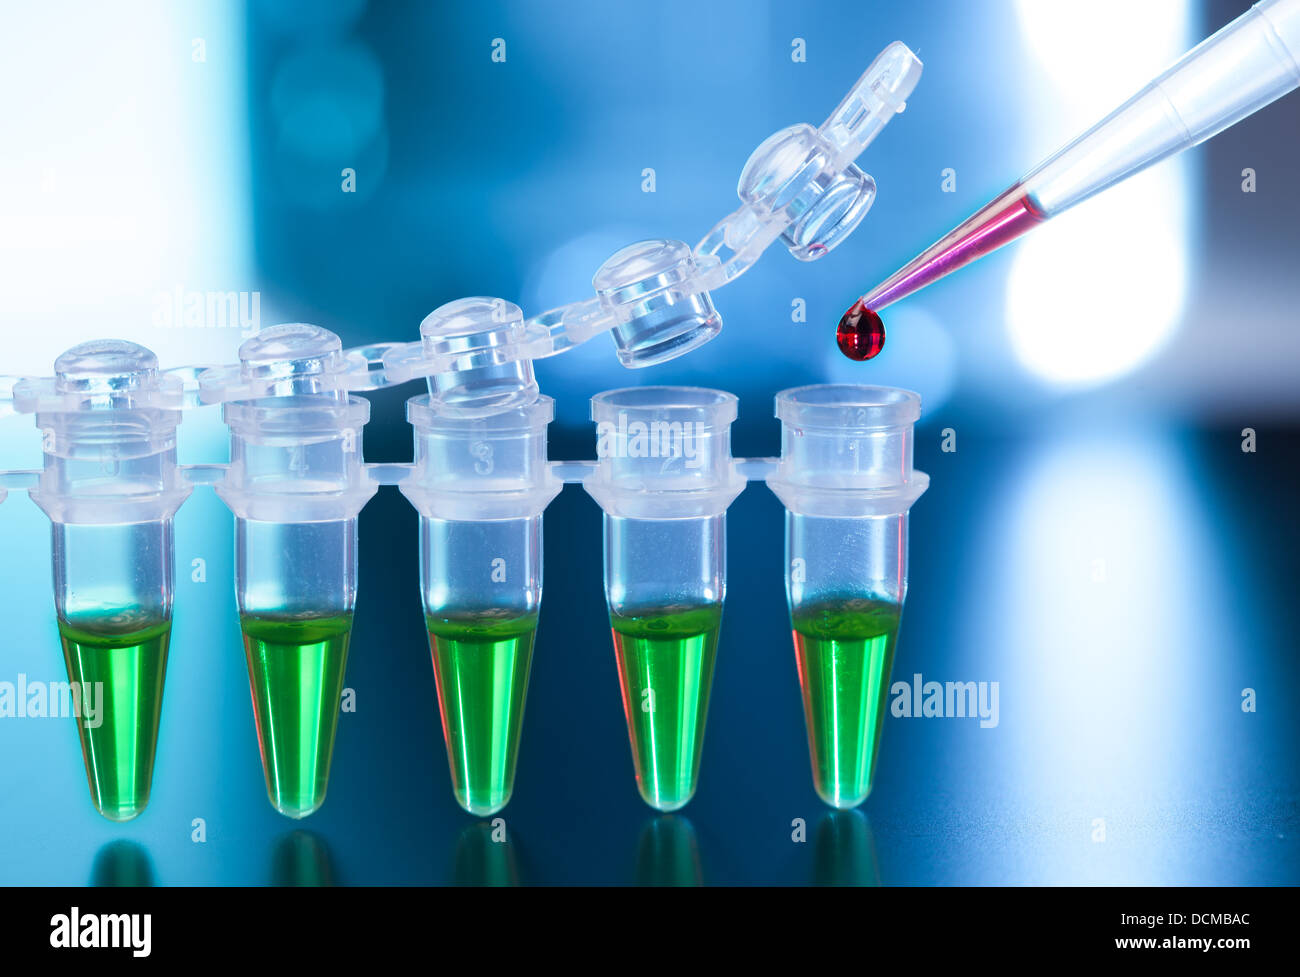 Loading of PCR samples in numbered plastic tubes Stock Photo